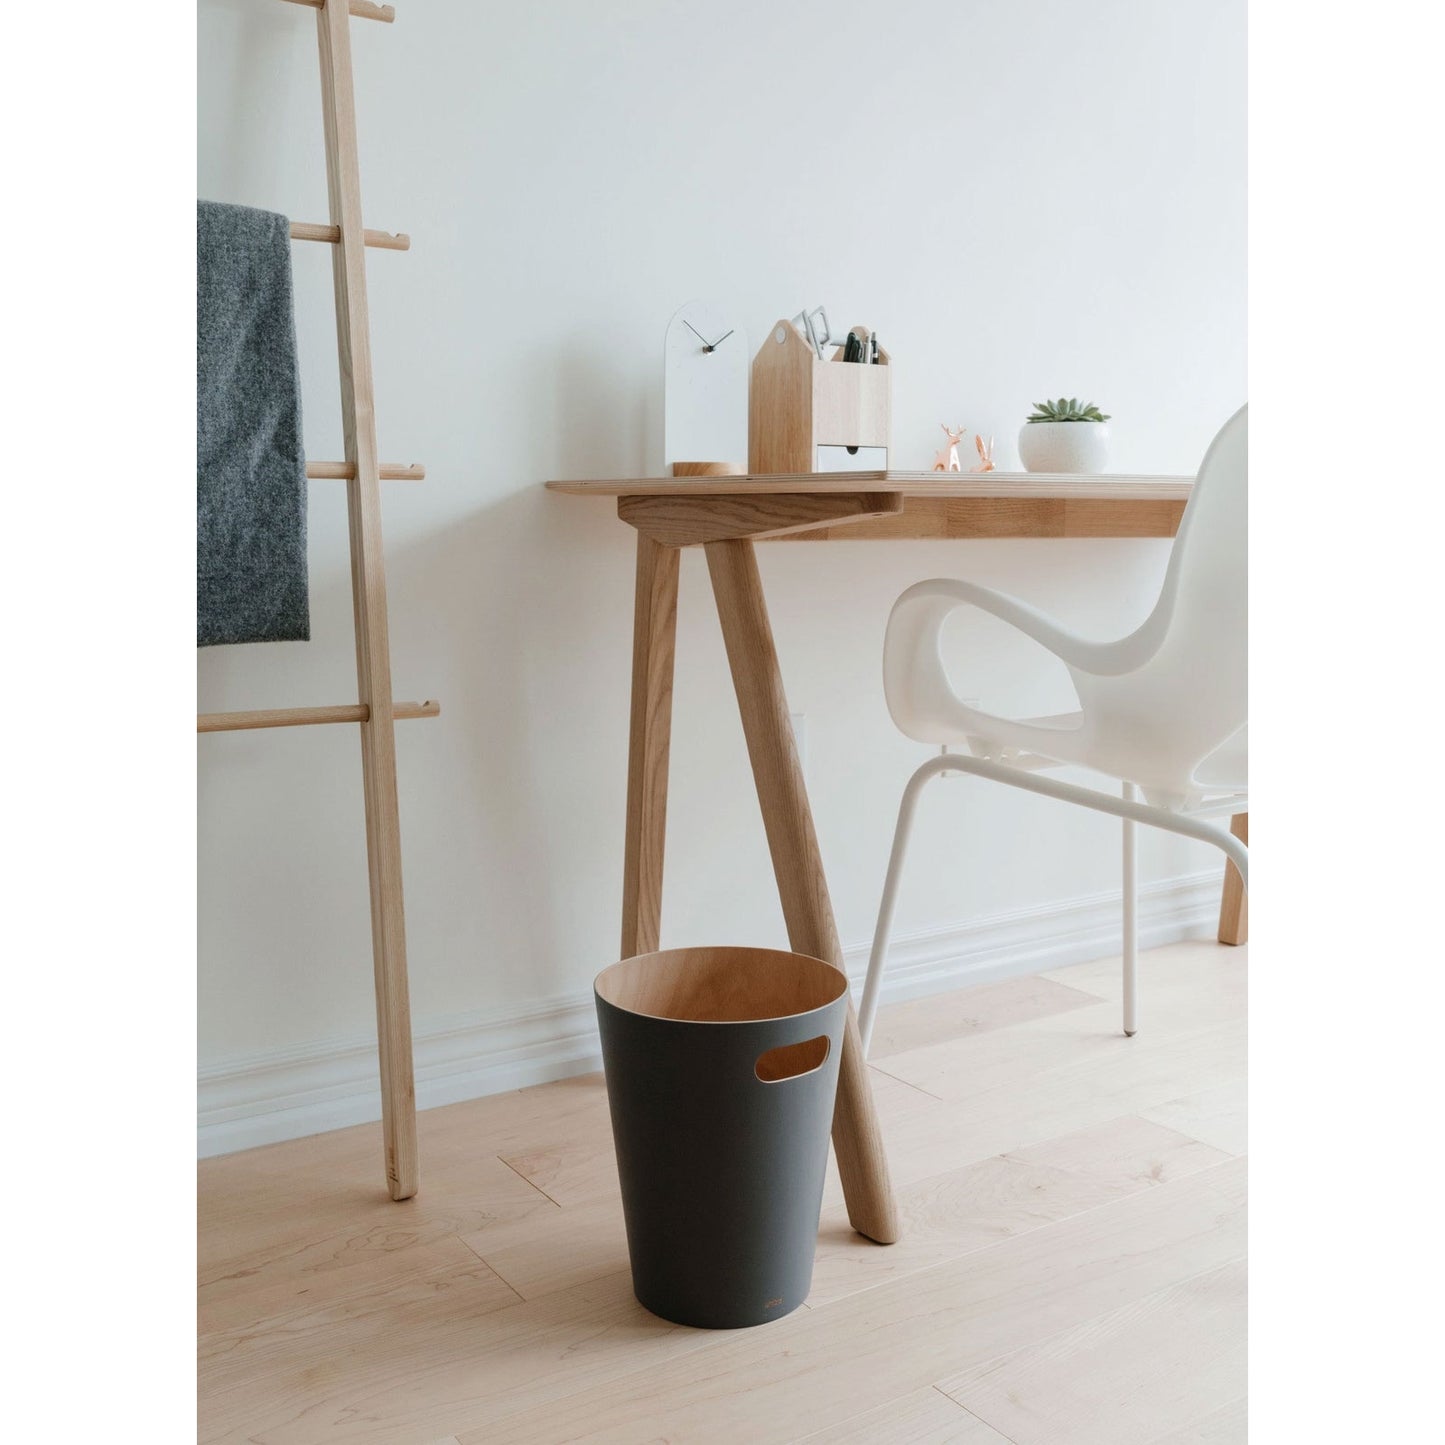 Woodrow Trash Can in Charcoal / Natural